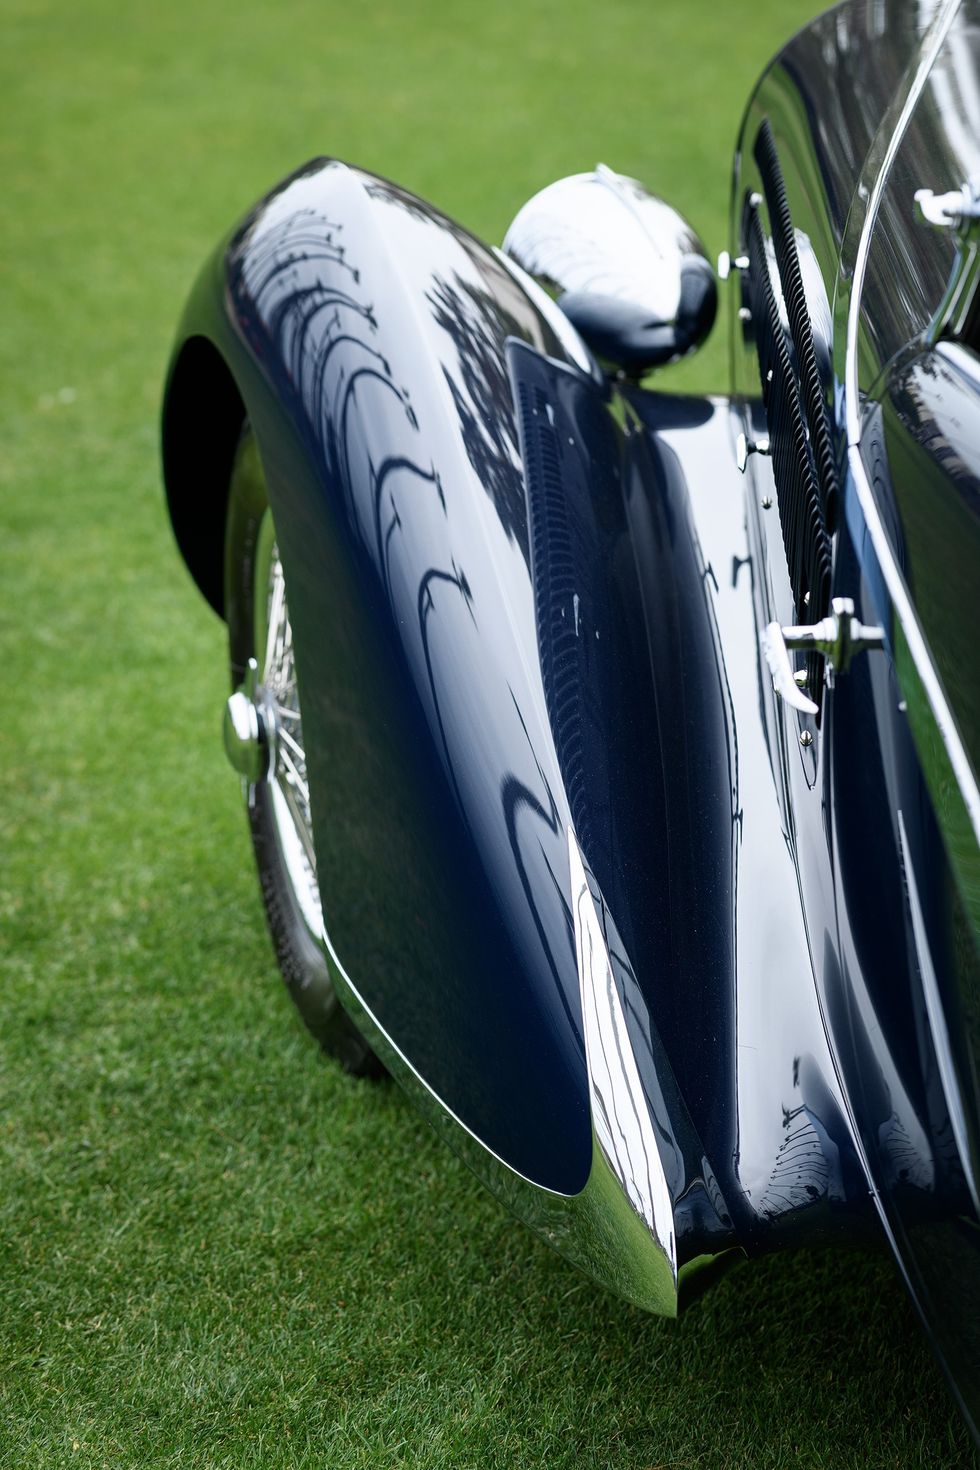 1936 Delahaye 135 Competition convertible